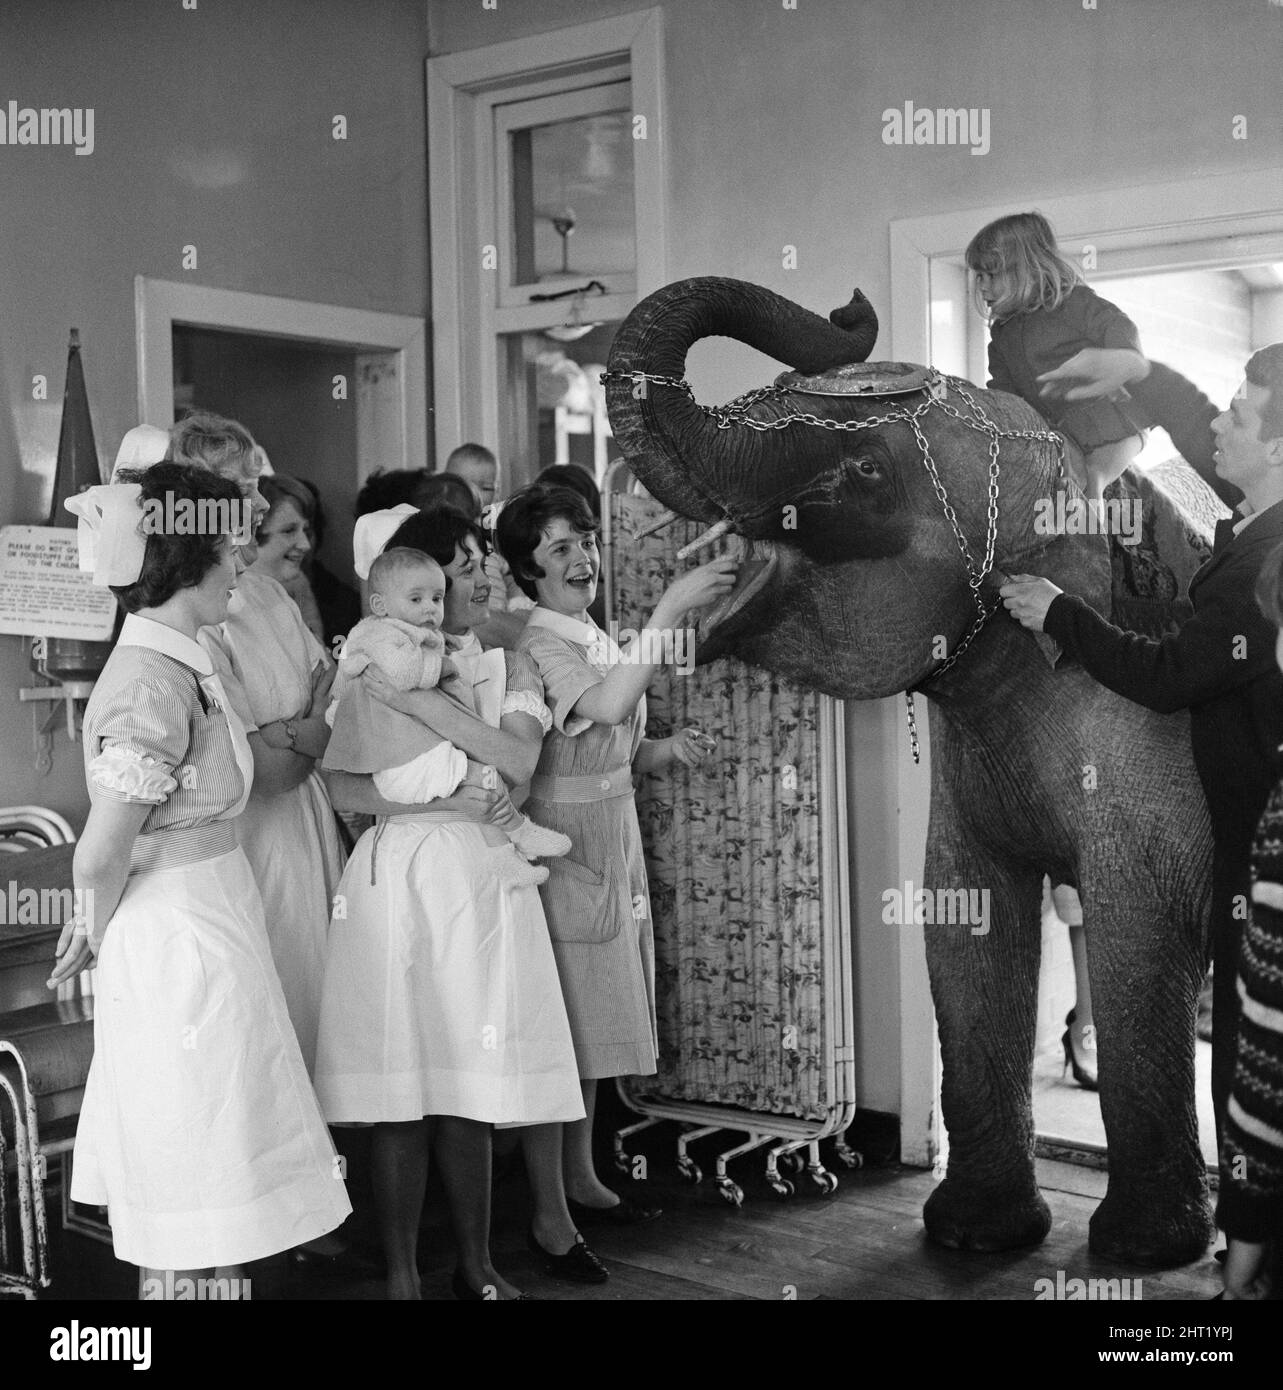 Three year old Juanita Jahn (seated on elephant), daughter of Harry Jahn, elephant trainer with Billy Smarts Circus, took Gilda, one of her daddy's elephants along to Queen's Park Hospital at Blackburn, Lancs, were she was born three years ago. May 1965. Stock Photo